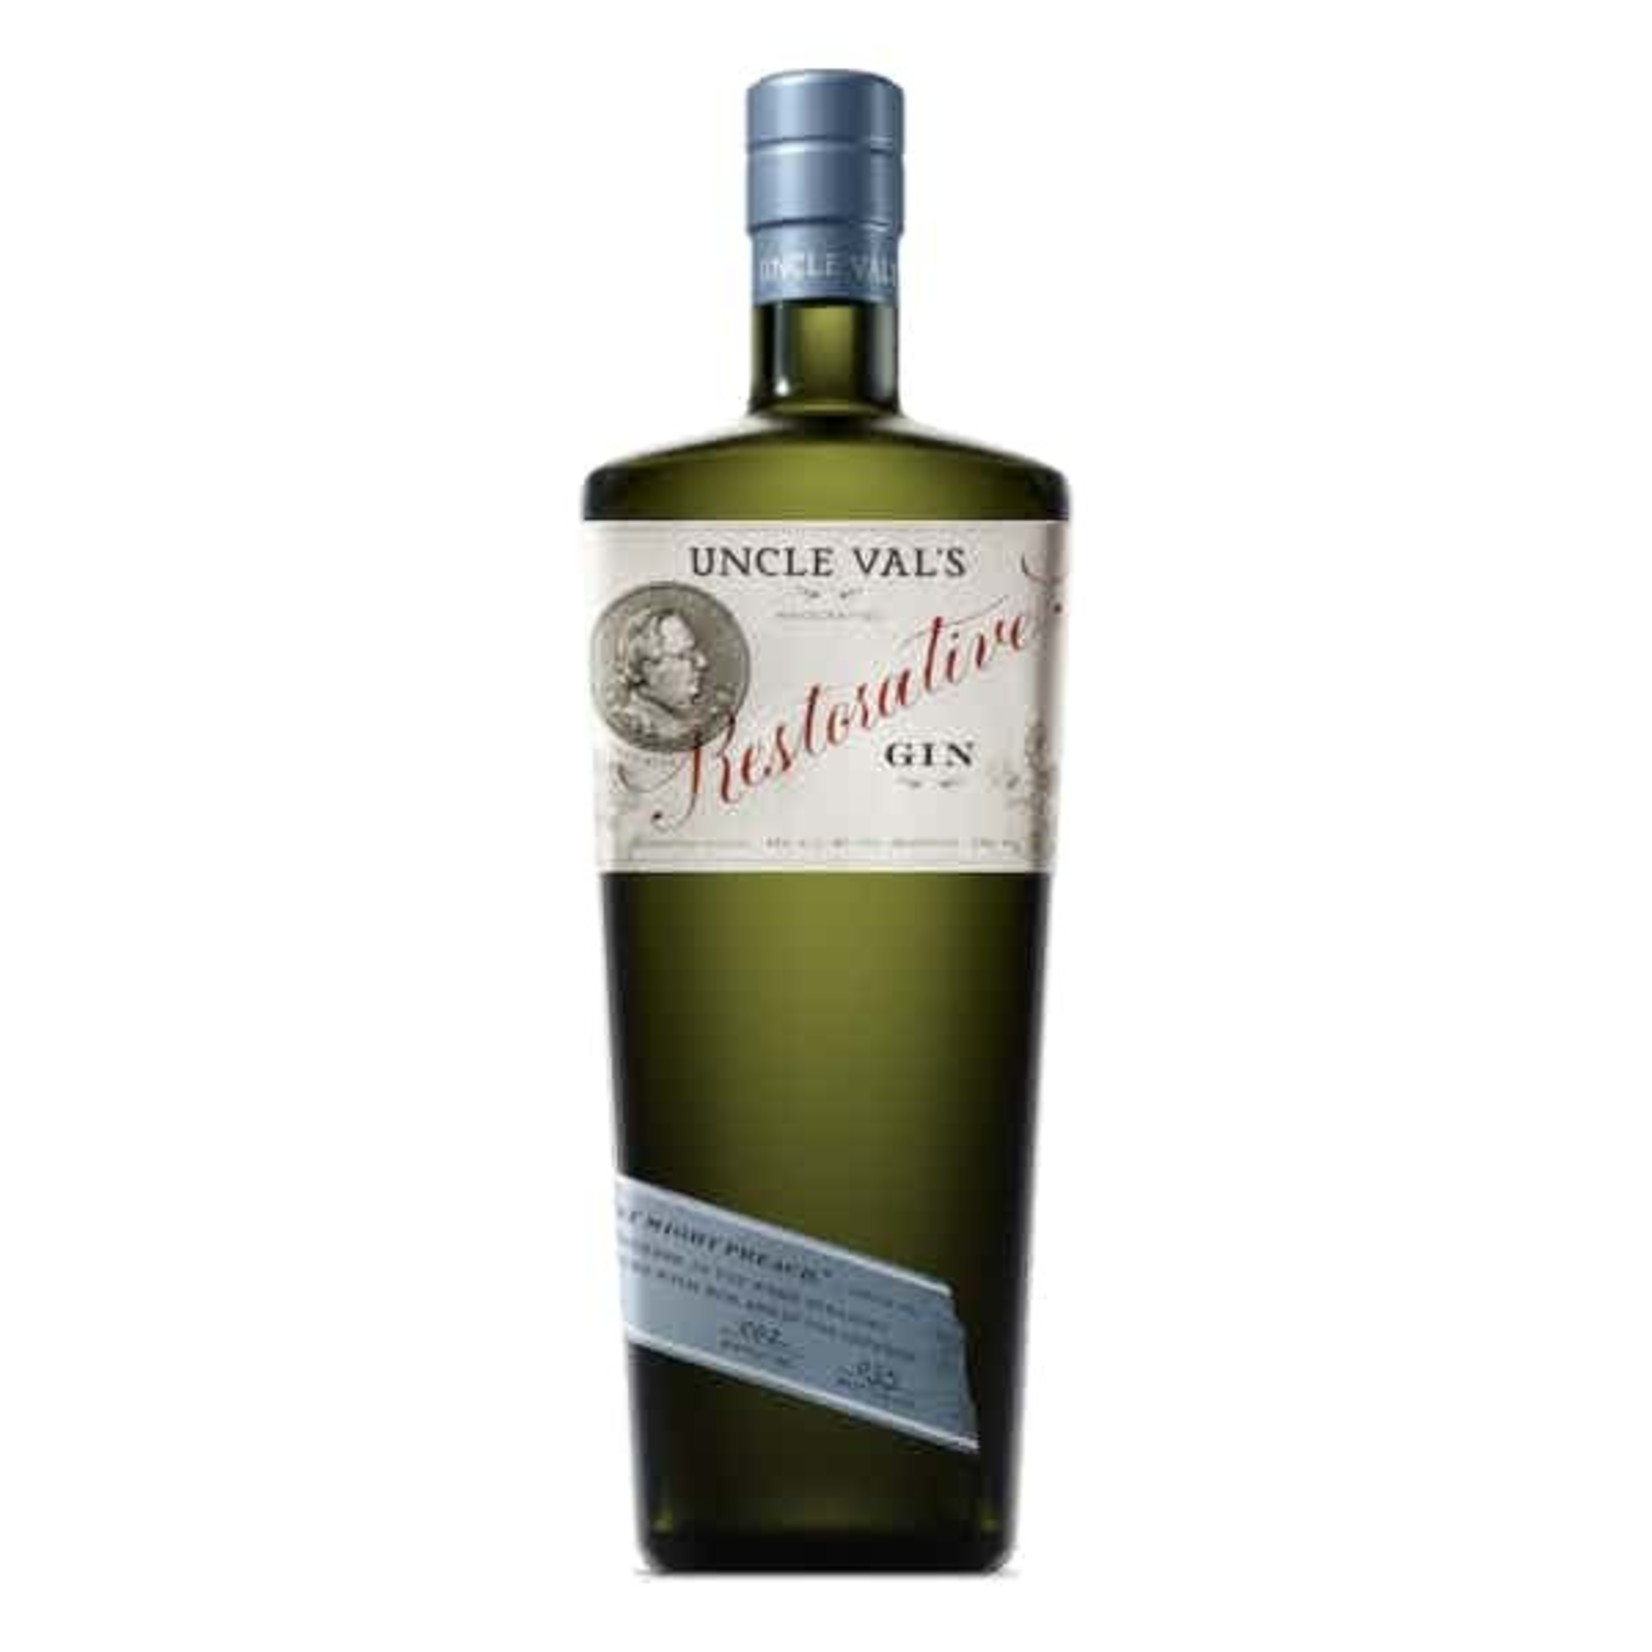 Uncle Val's Uncle Val's Gin Botanical Gin